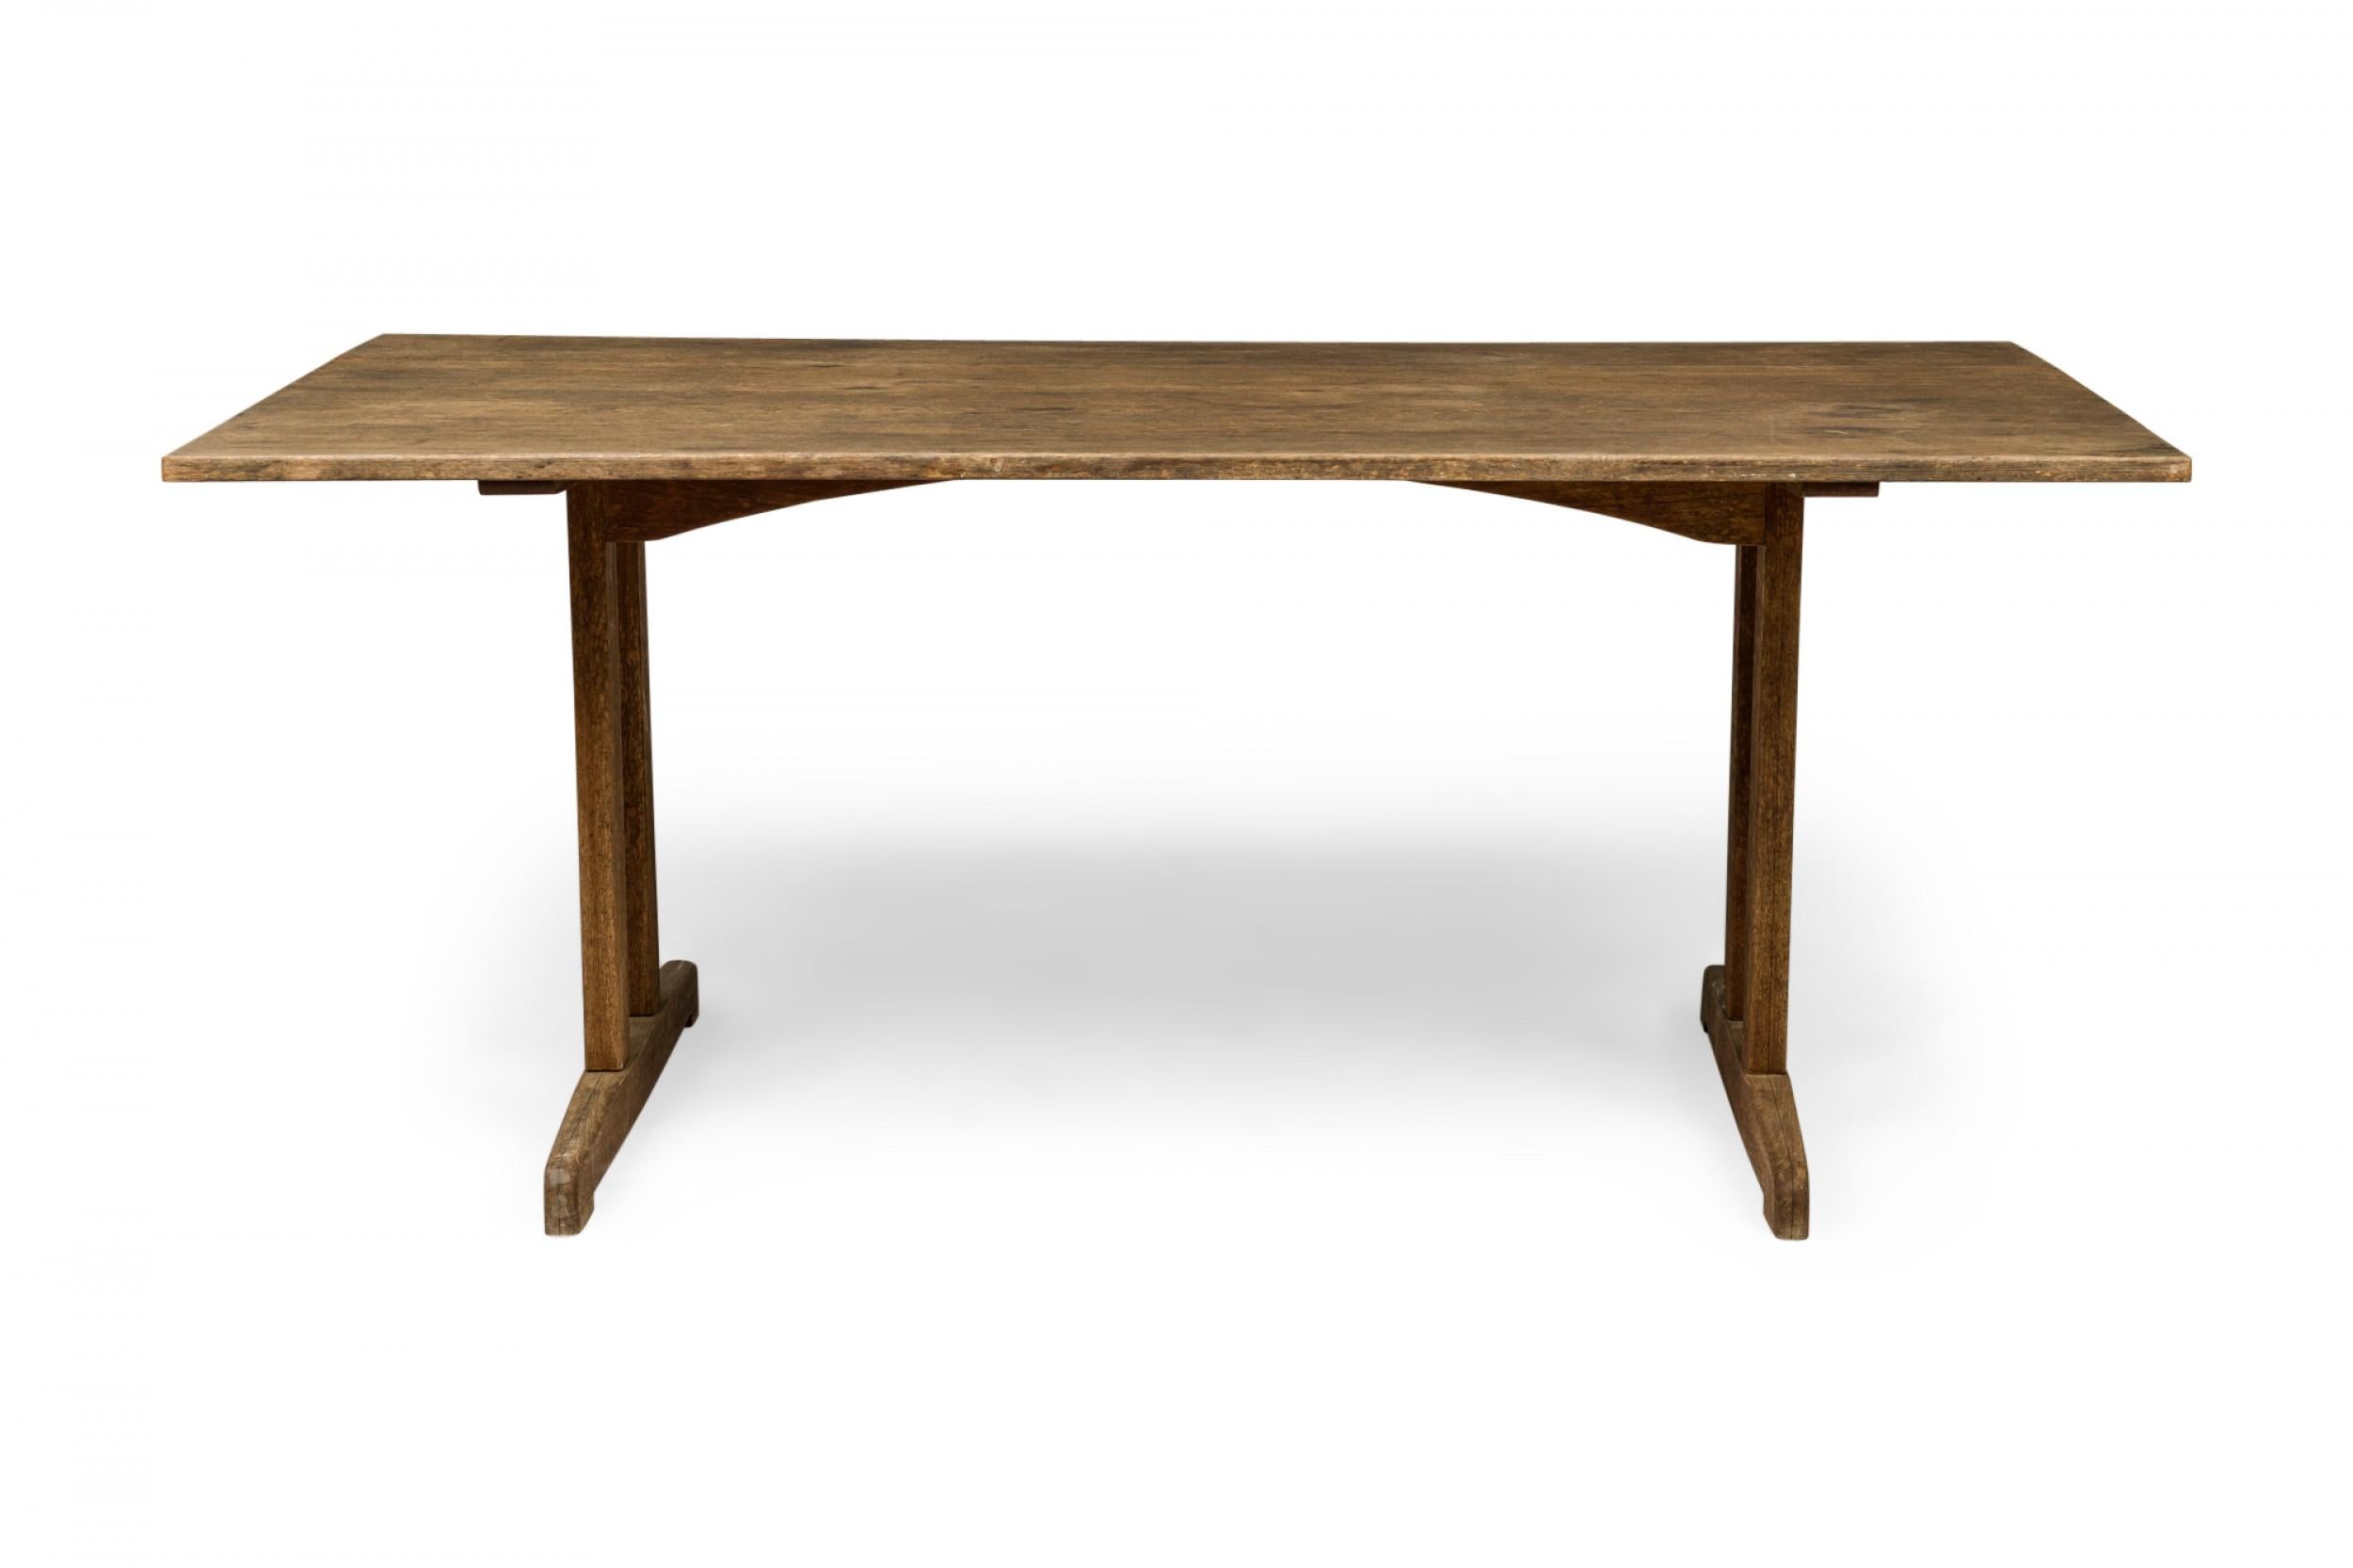 Danish mid-century Shaker-style wooden dining table with a rectangular wooden top resting on two double T-shaped legs. (BØRGE MOGENSEN FOR FDB MØBLER)